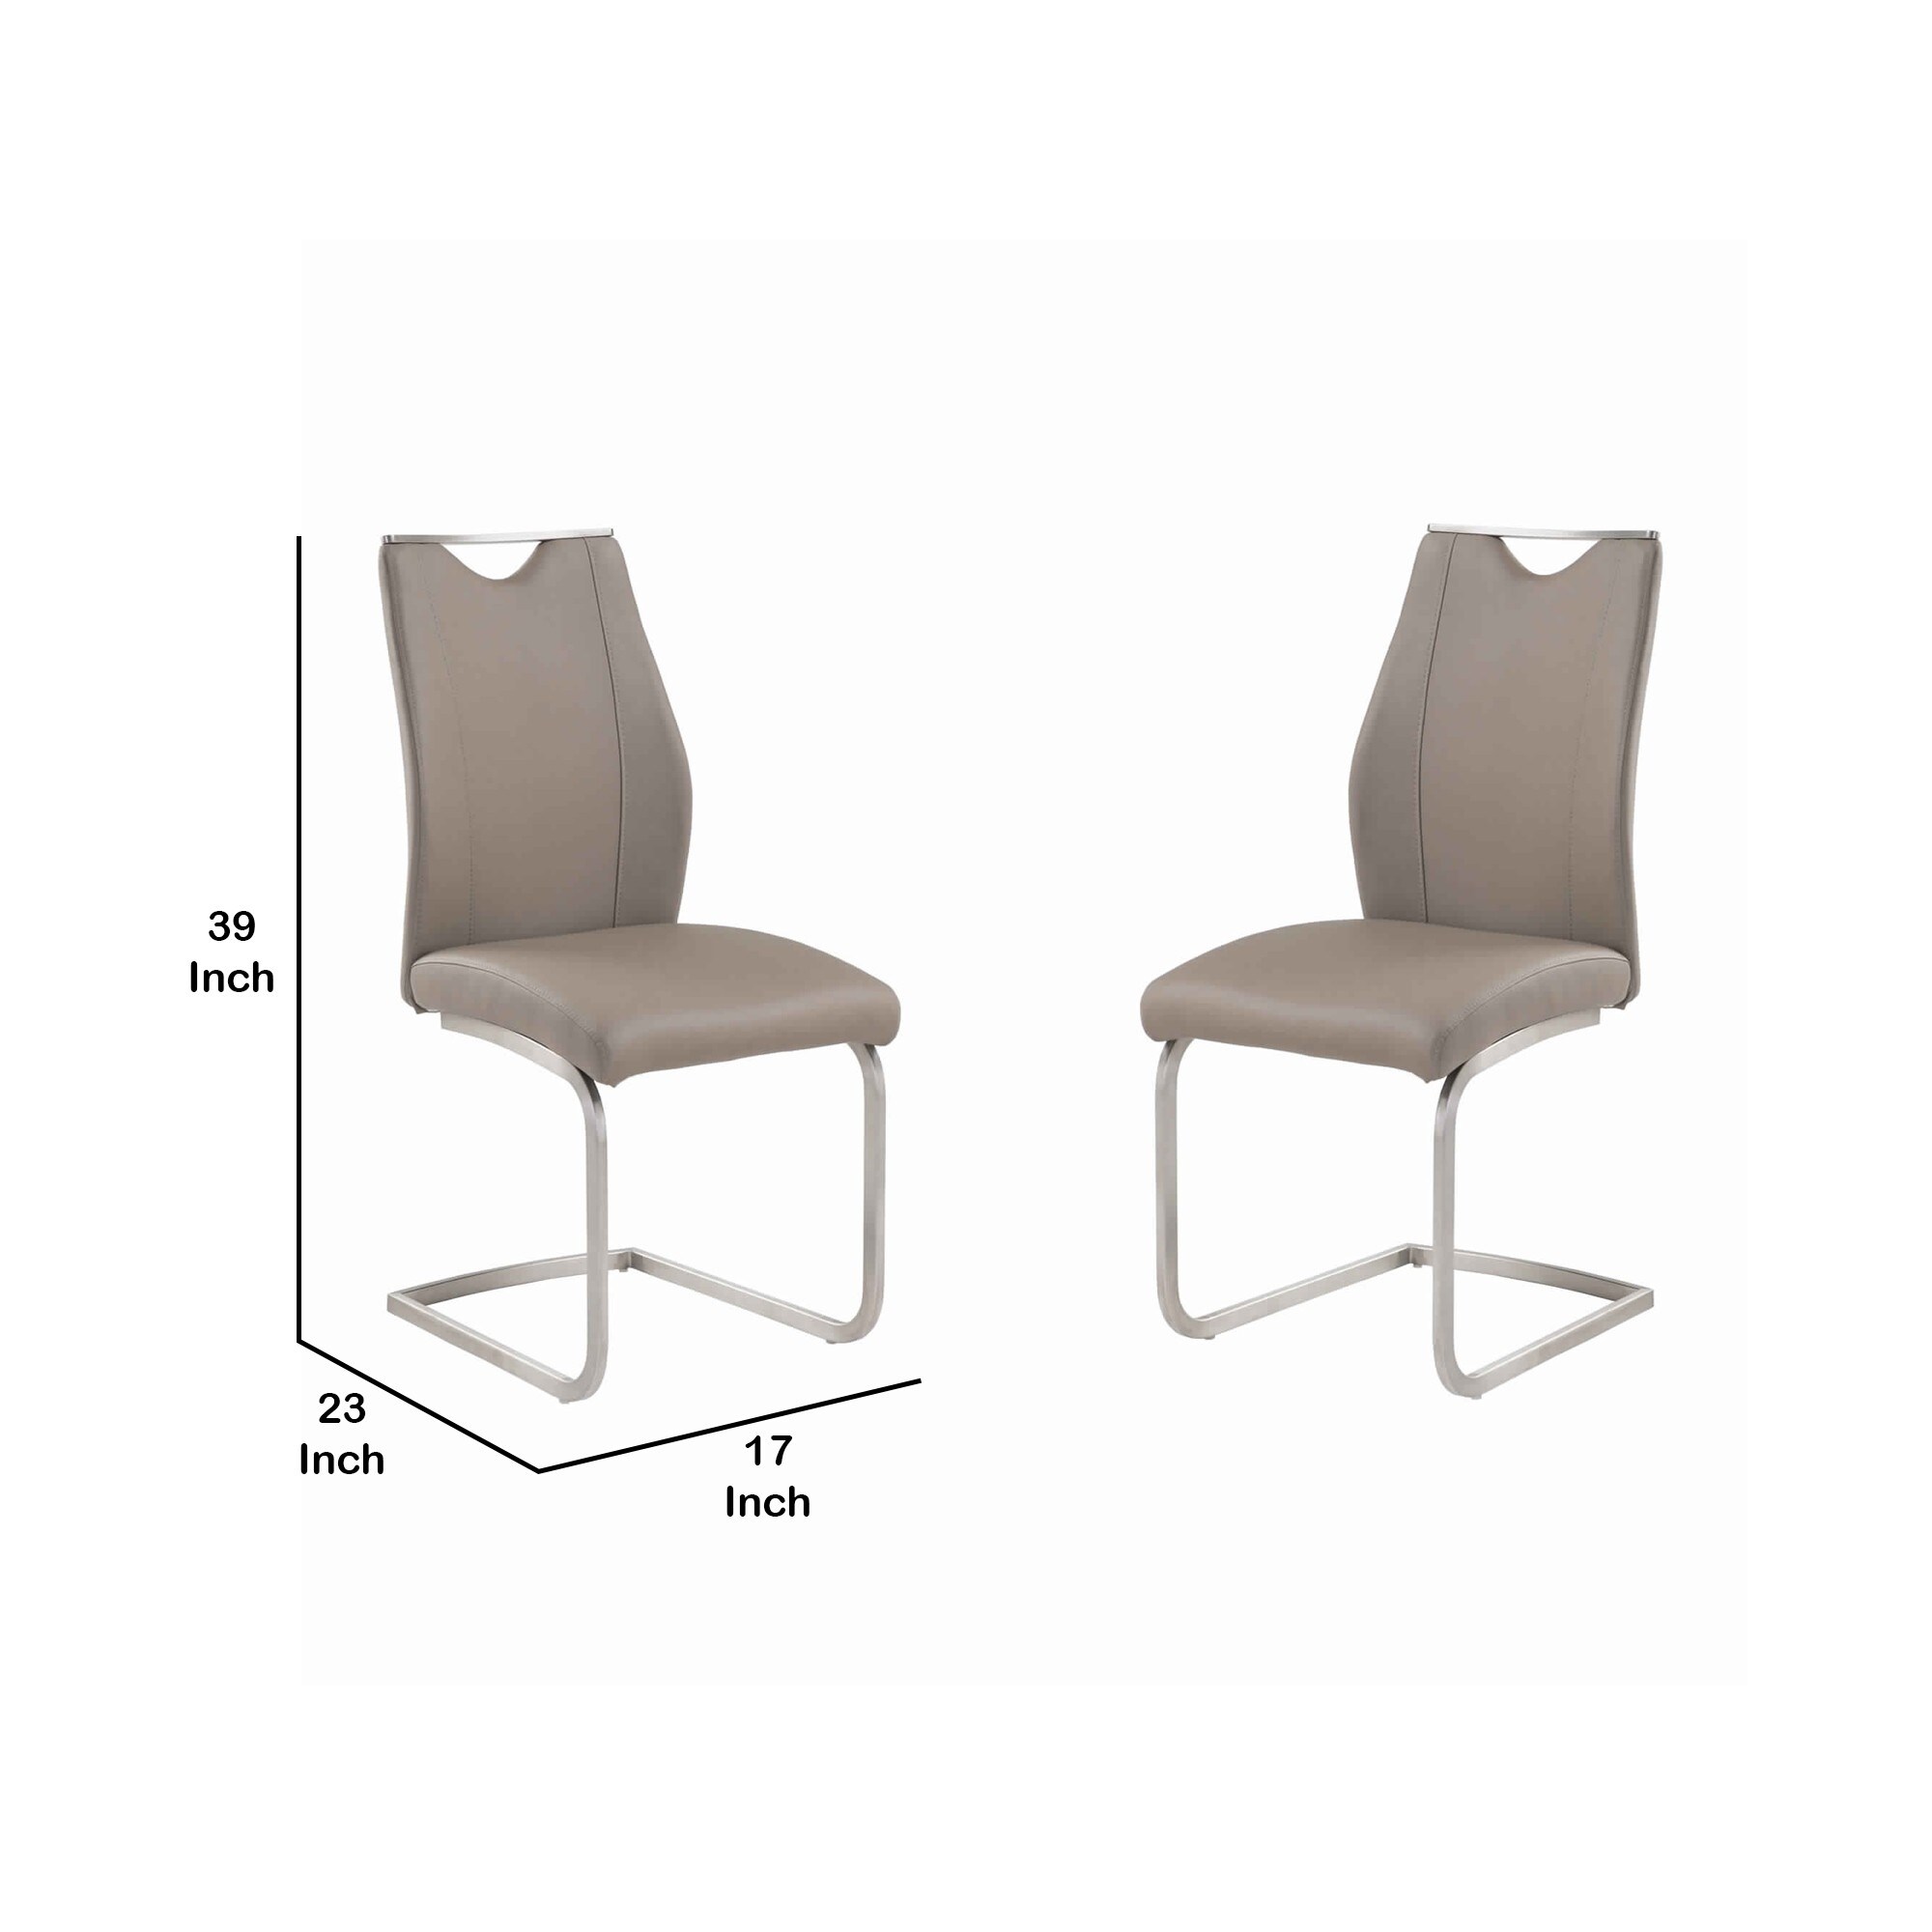 Leatherette Dining Chair with Cantilever Base, Set of 2, Silver and Brown